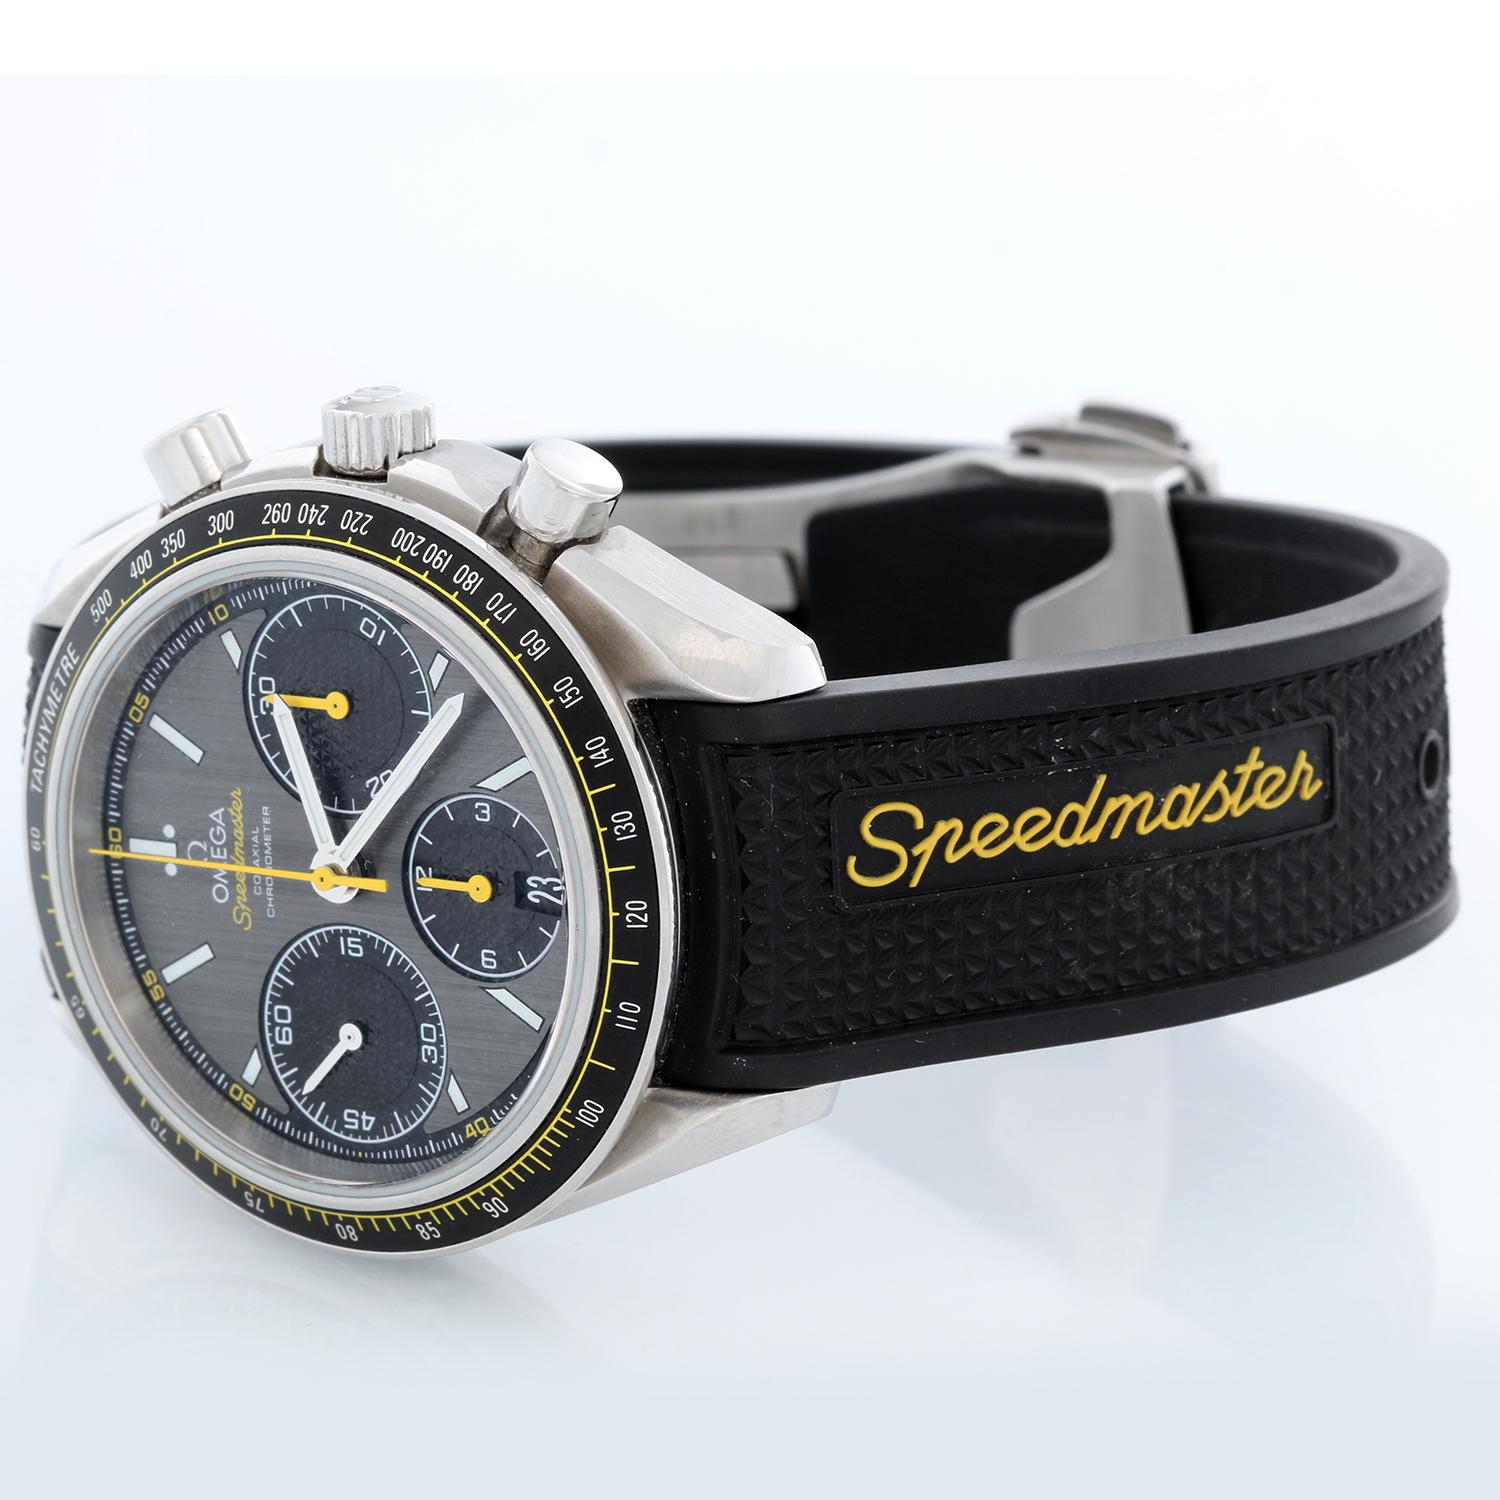 Omega Speedmaster Racing Co-Axial Chronometer Chronograph 40mm on Rubber Strap - Automatic winding. Stainless steel case (40mm diameter). Grey Dial with white and yellow hands and markers. Omega Rubber strap with deployant clasp. Pre-owned with box